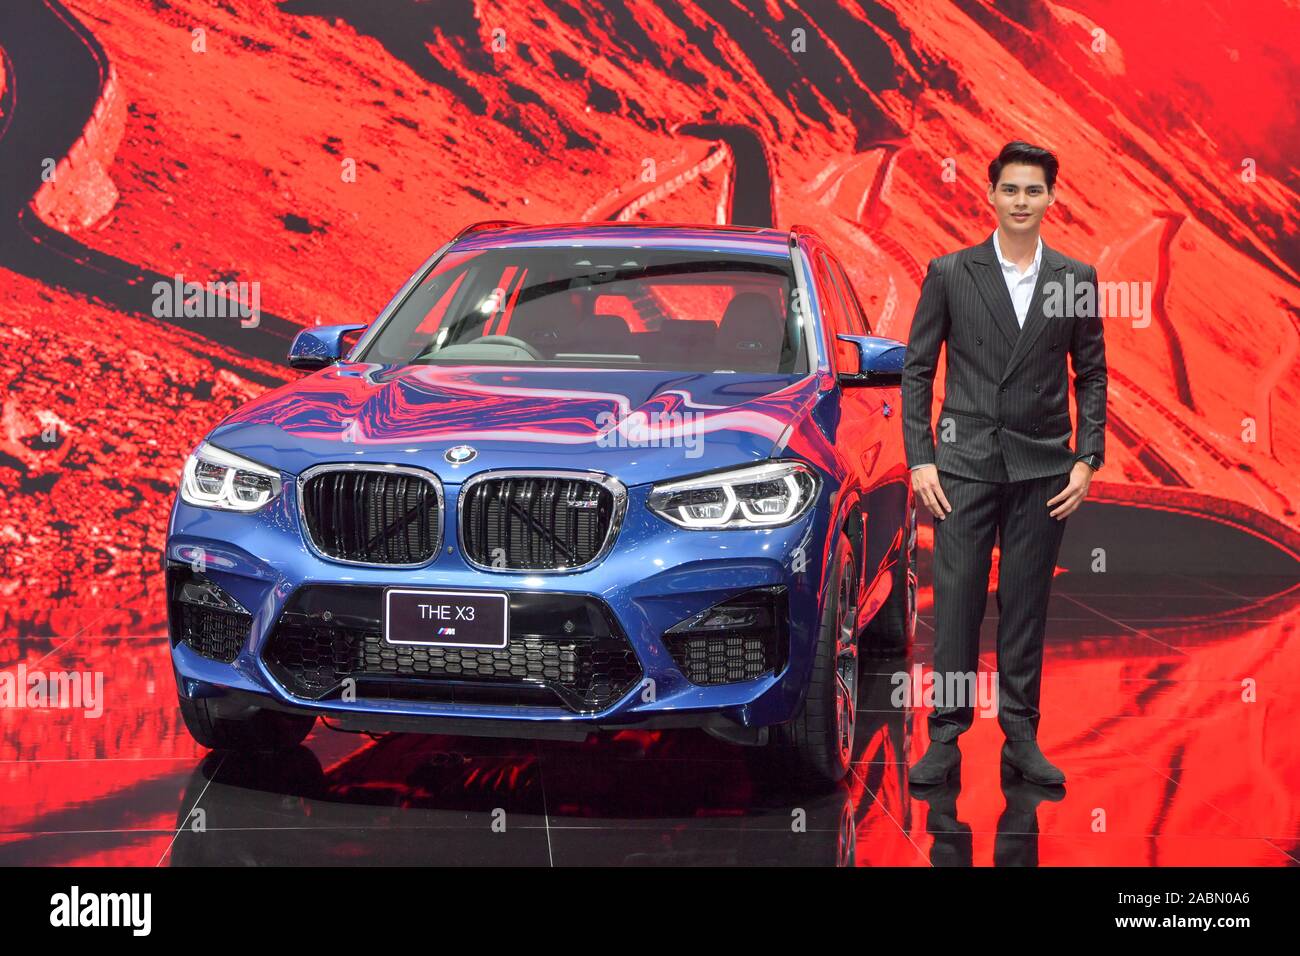 NONTHABURI - NOVEMBER 28: BMW THE X3 car on display at The 36th Thailand International Motor Expo 2019 on November 28, 2019 Nonthaburi, Thailand. Stock Photo